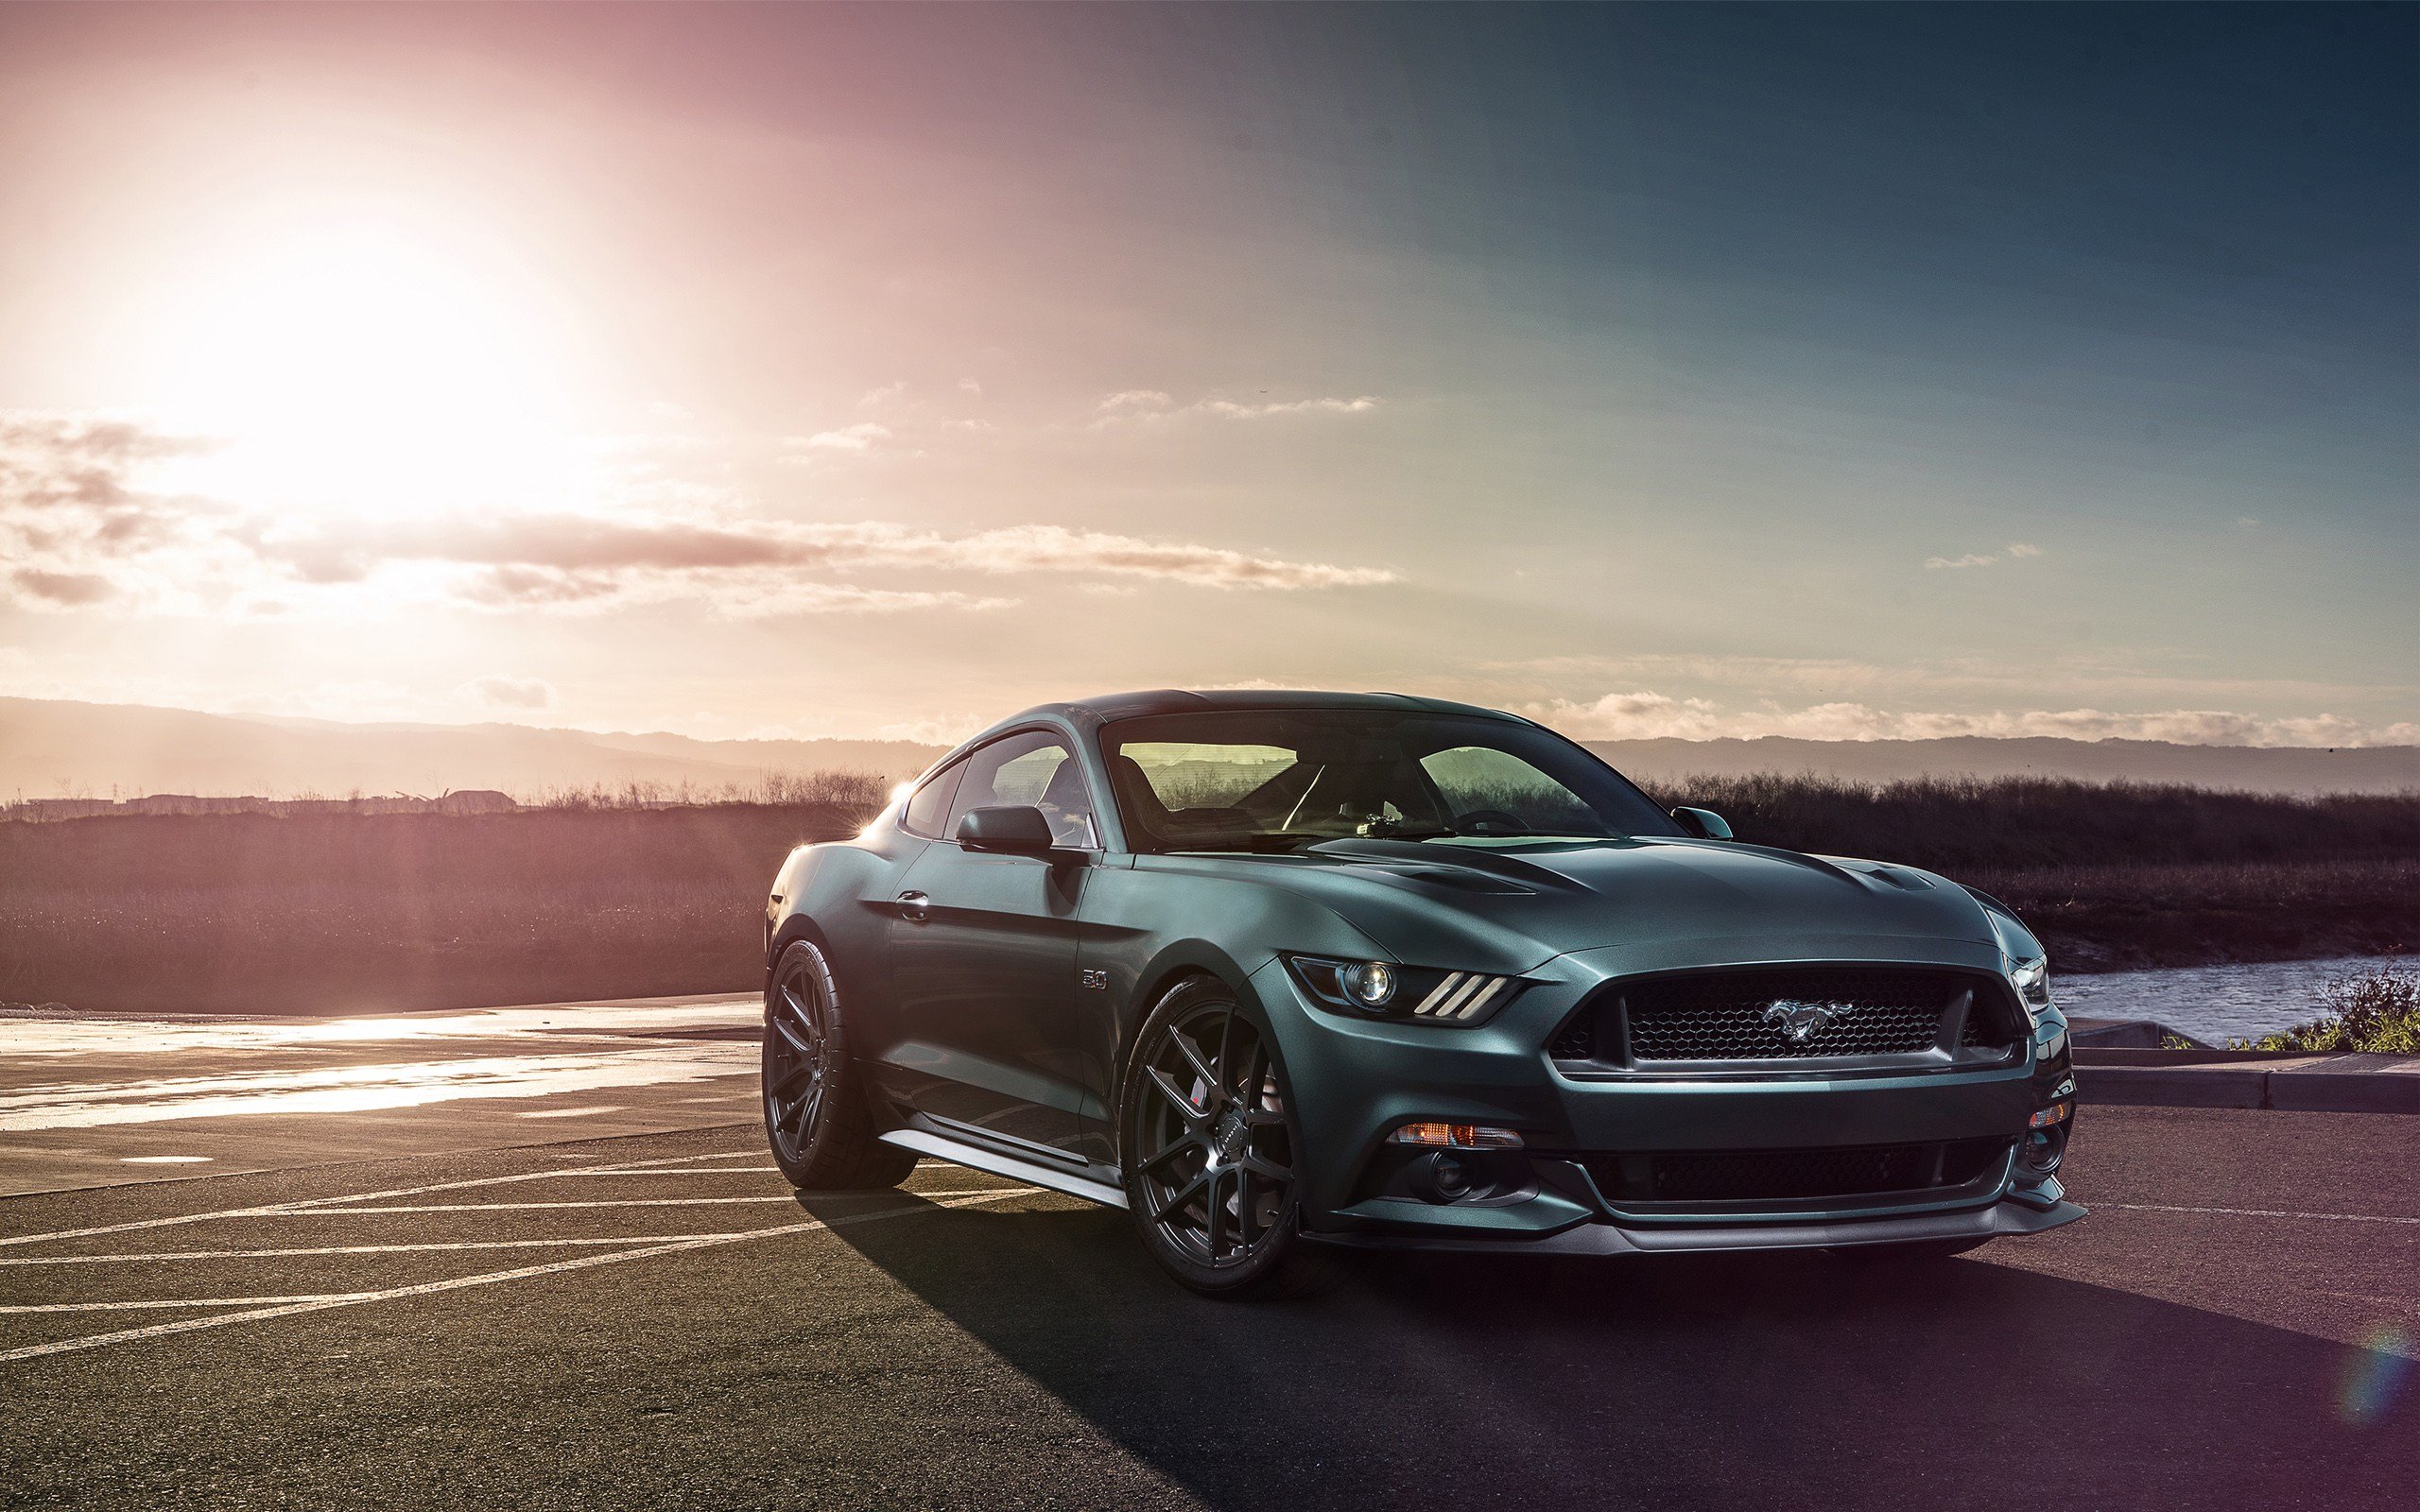 Ford Mustang Gt 5k Wallpapers Hd 2017 2018 Best Cars Ford 2560x1600